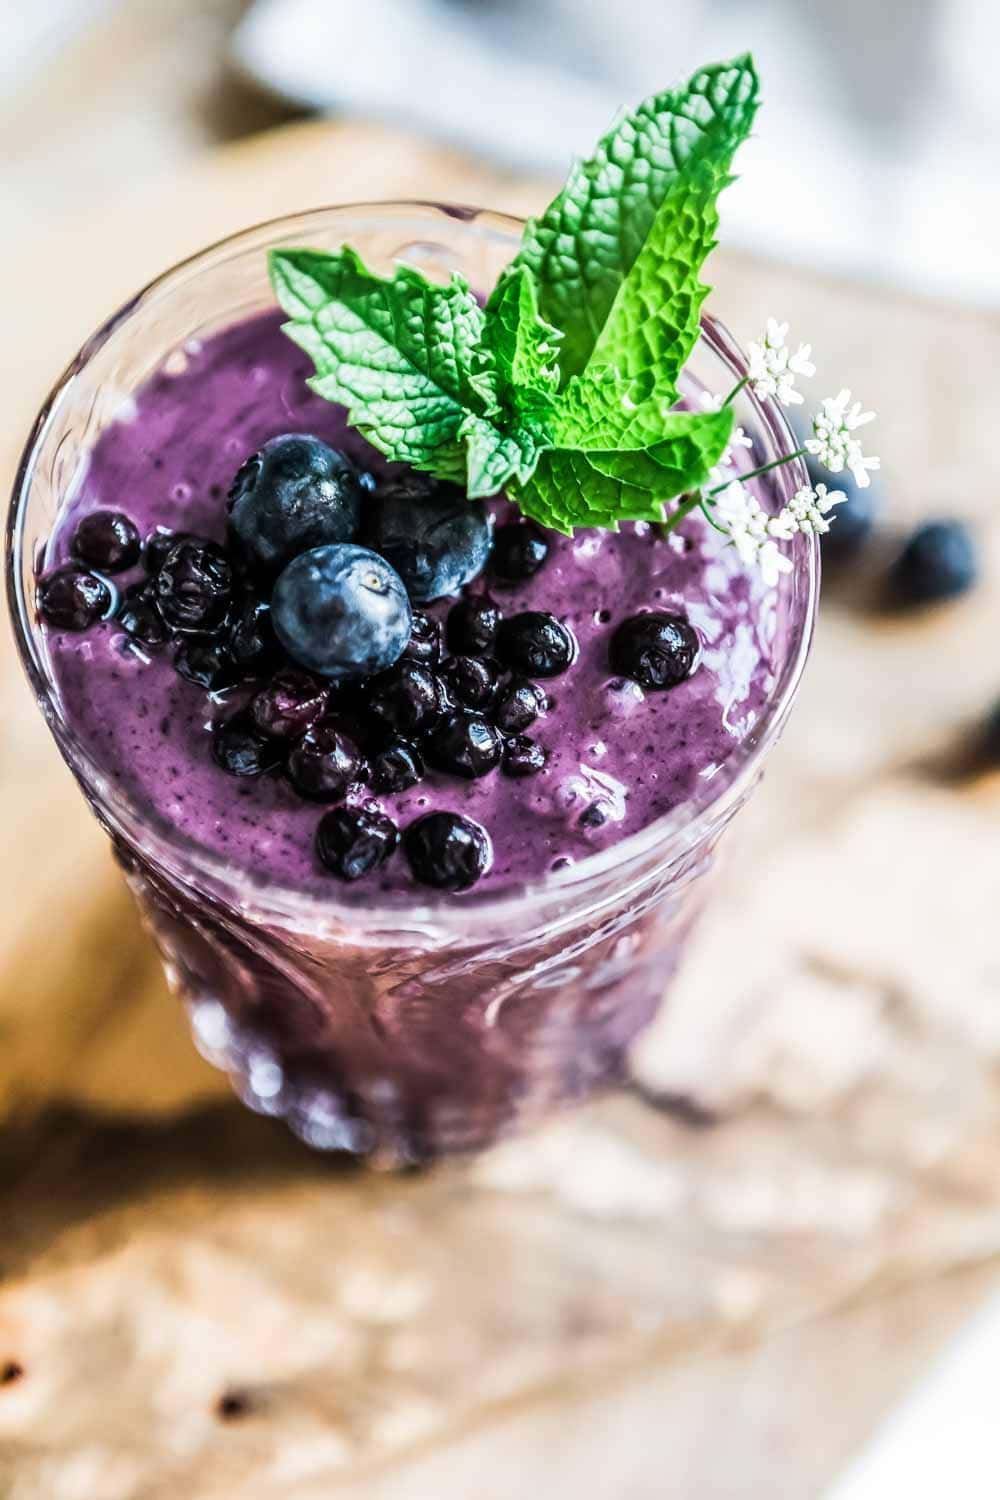 How to use blueberries in smoothies